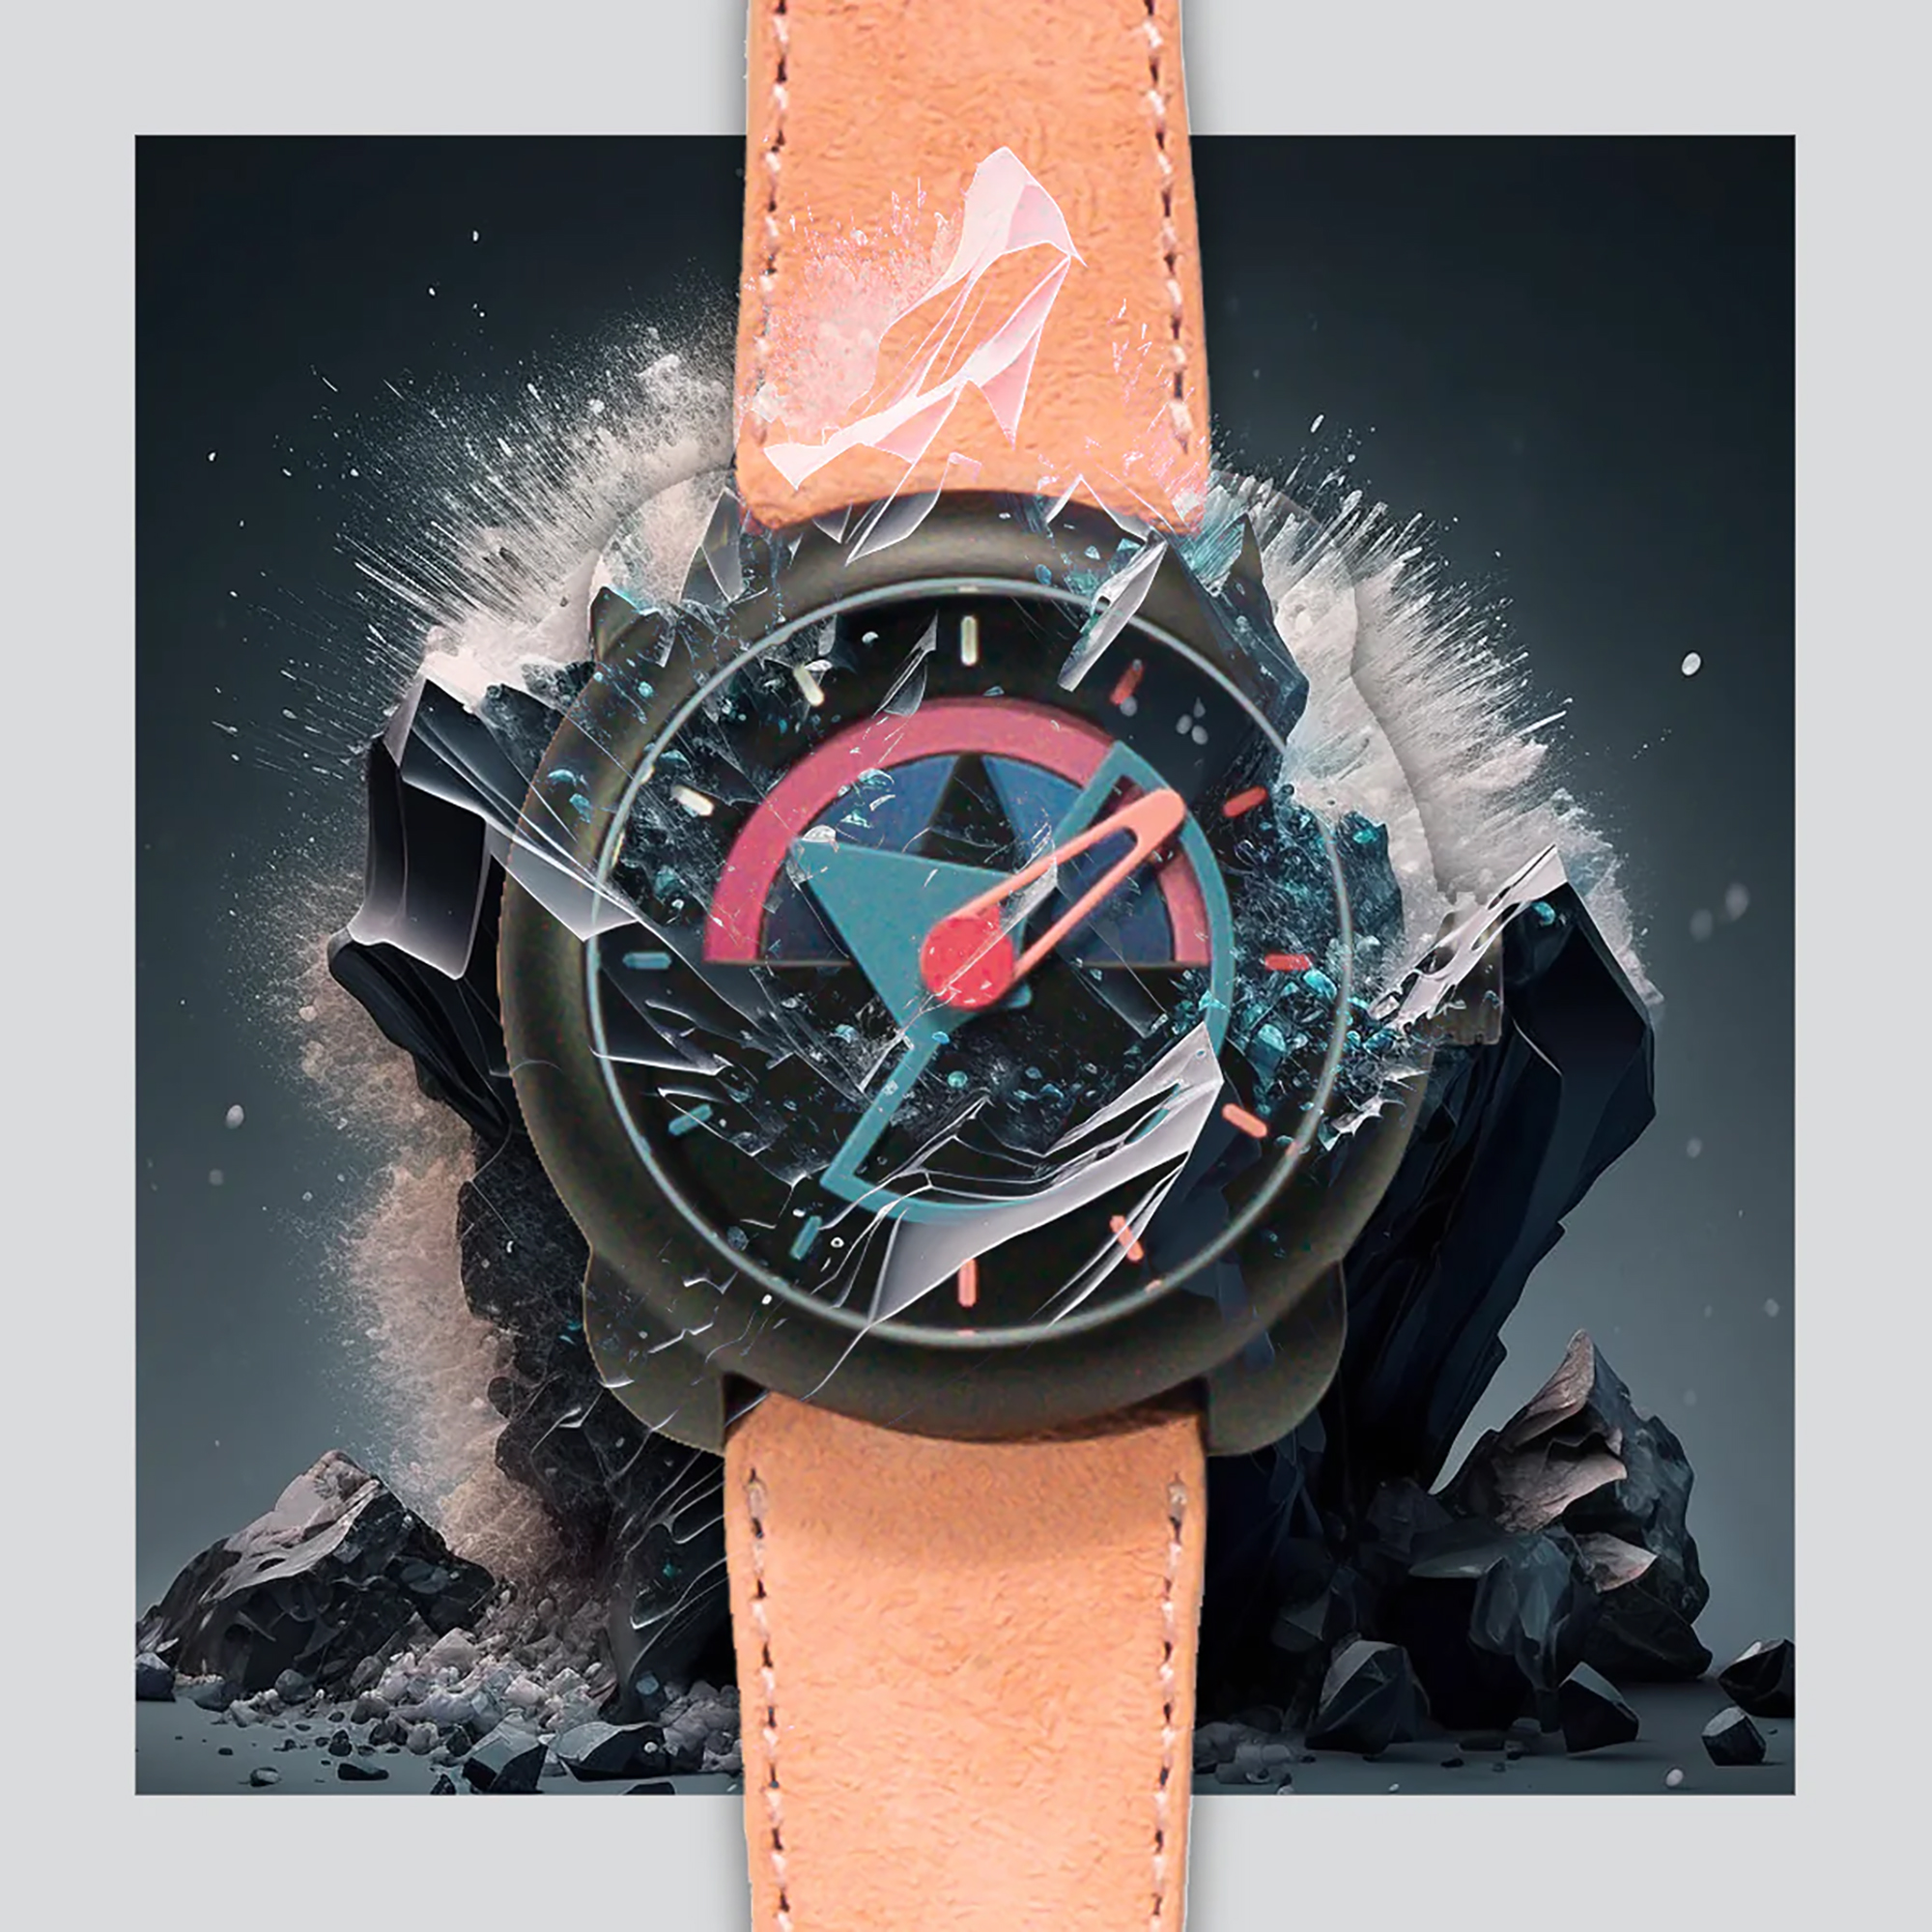 Introducing the Sō Labs Watch Collection - Gessato